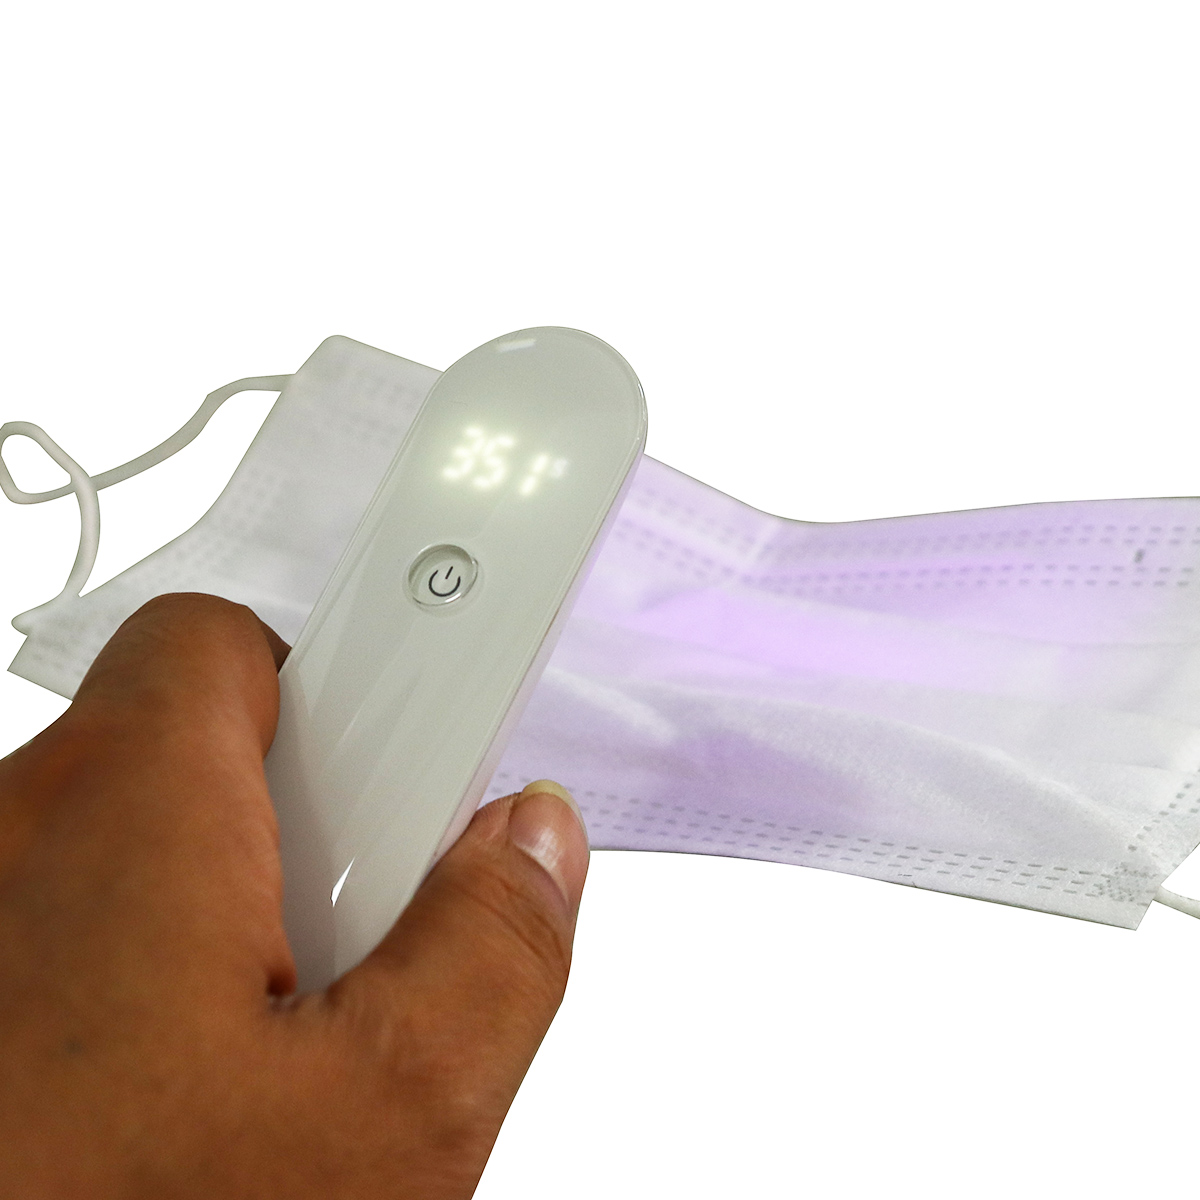 Portable-LED-UV-Sterilizer-Lamp-Disinfection-Handheld-For-Phones-Clothes-Bedding-1670454-6